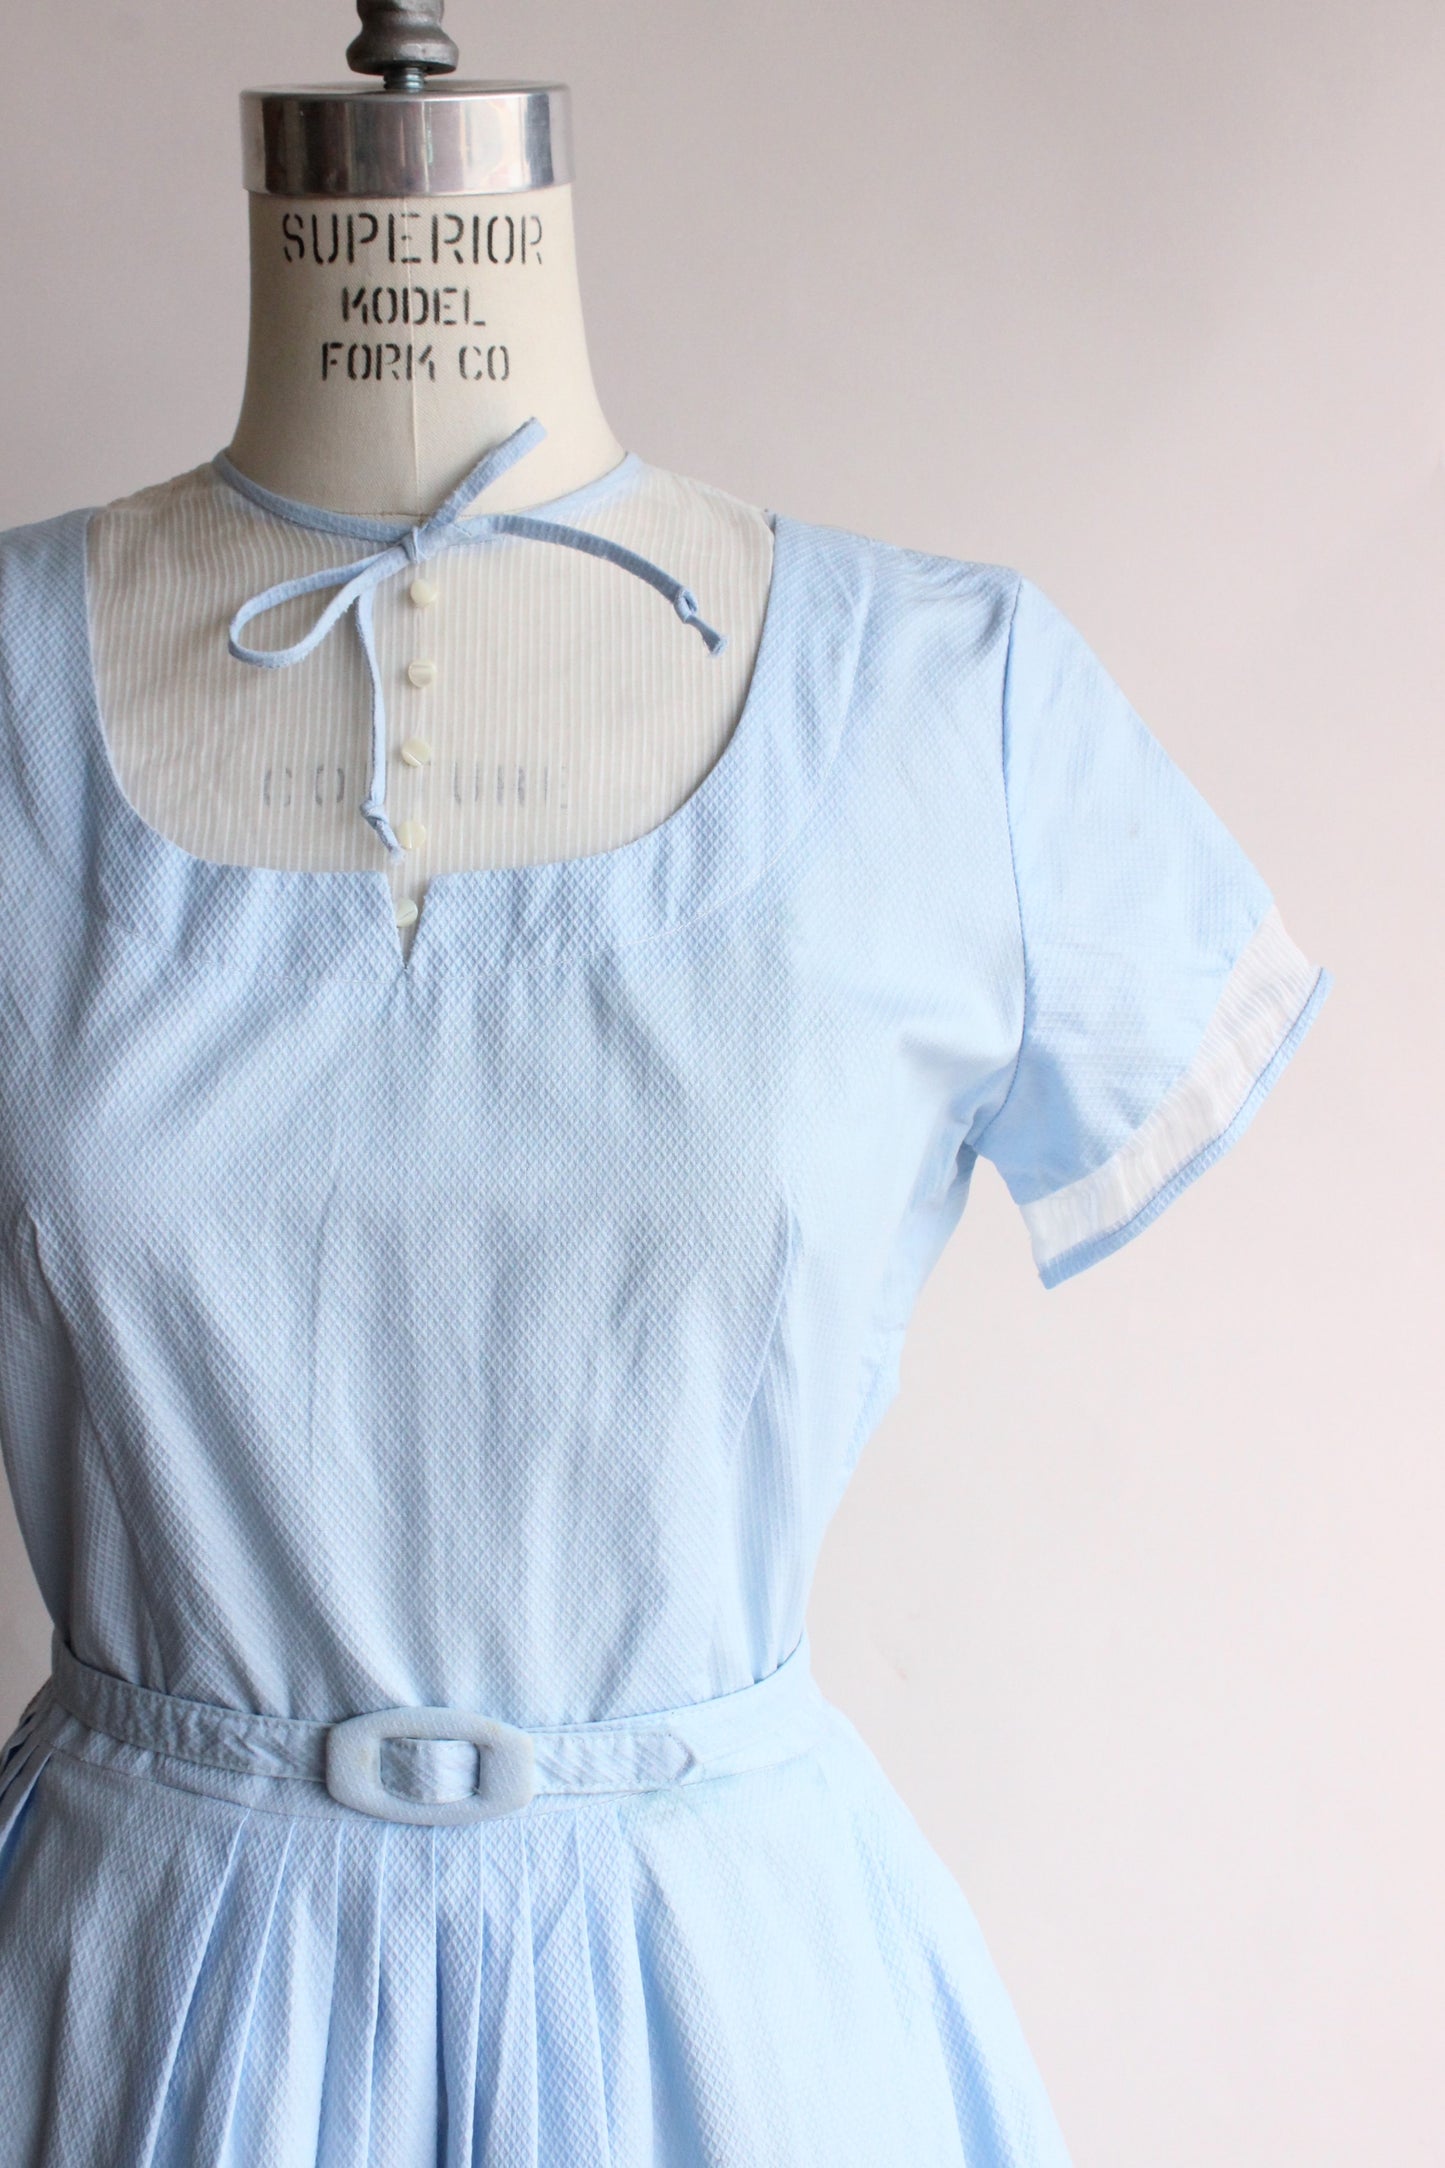 Vintage 1950s Blue Cotton Dress with White Panel